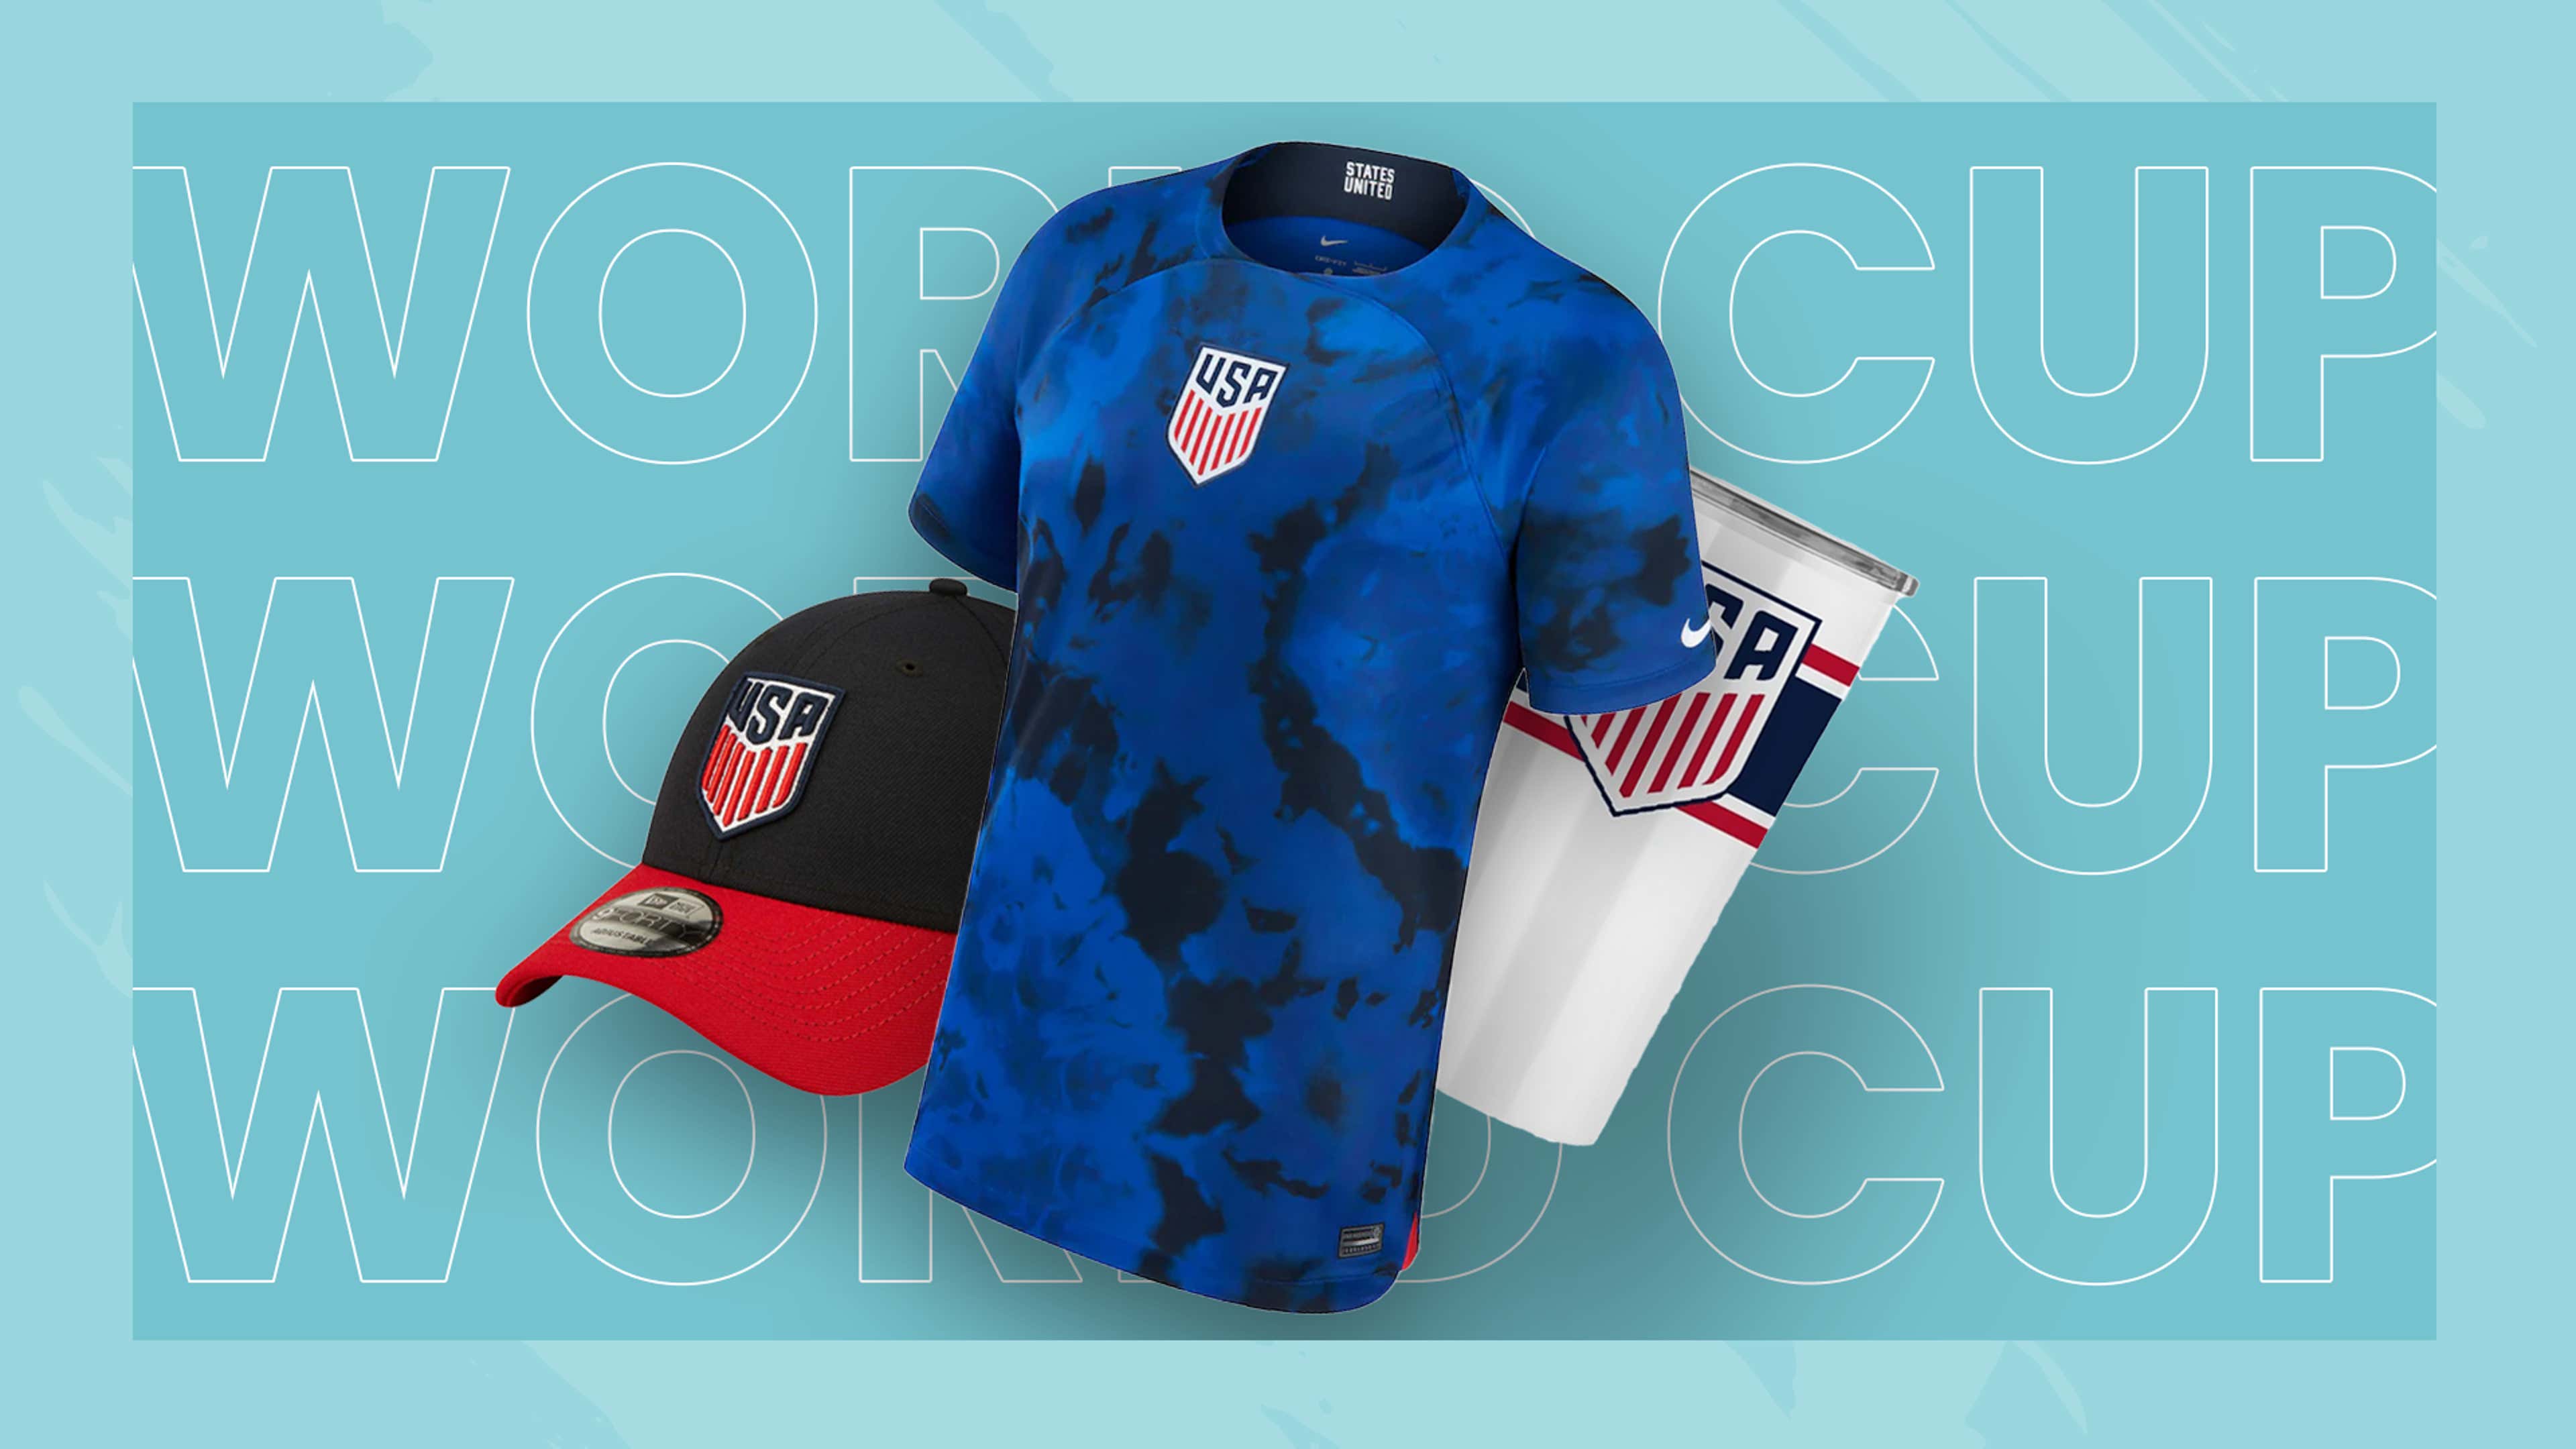 USMNT World Cup kit and merch 2022: Where can I buy it and how much does it  cost?